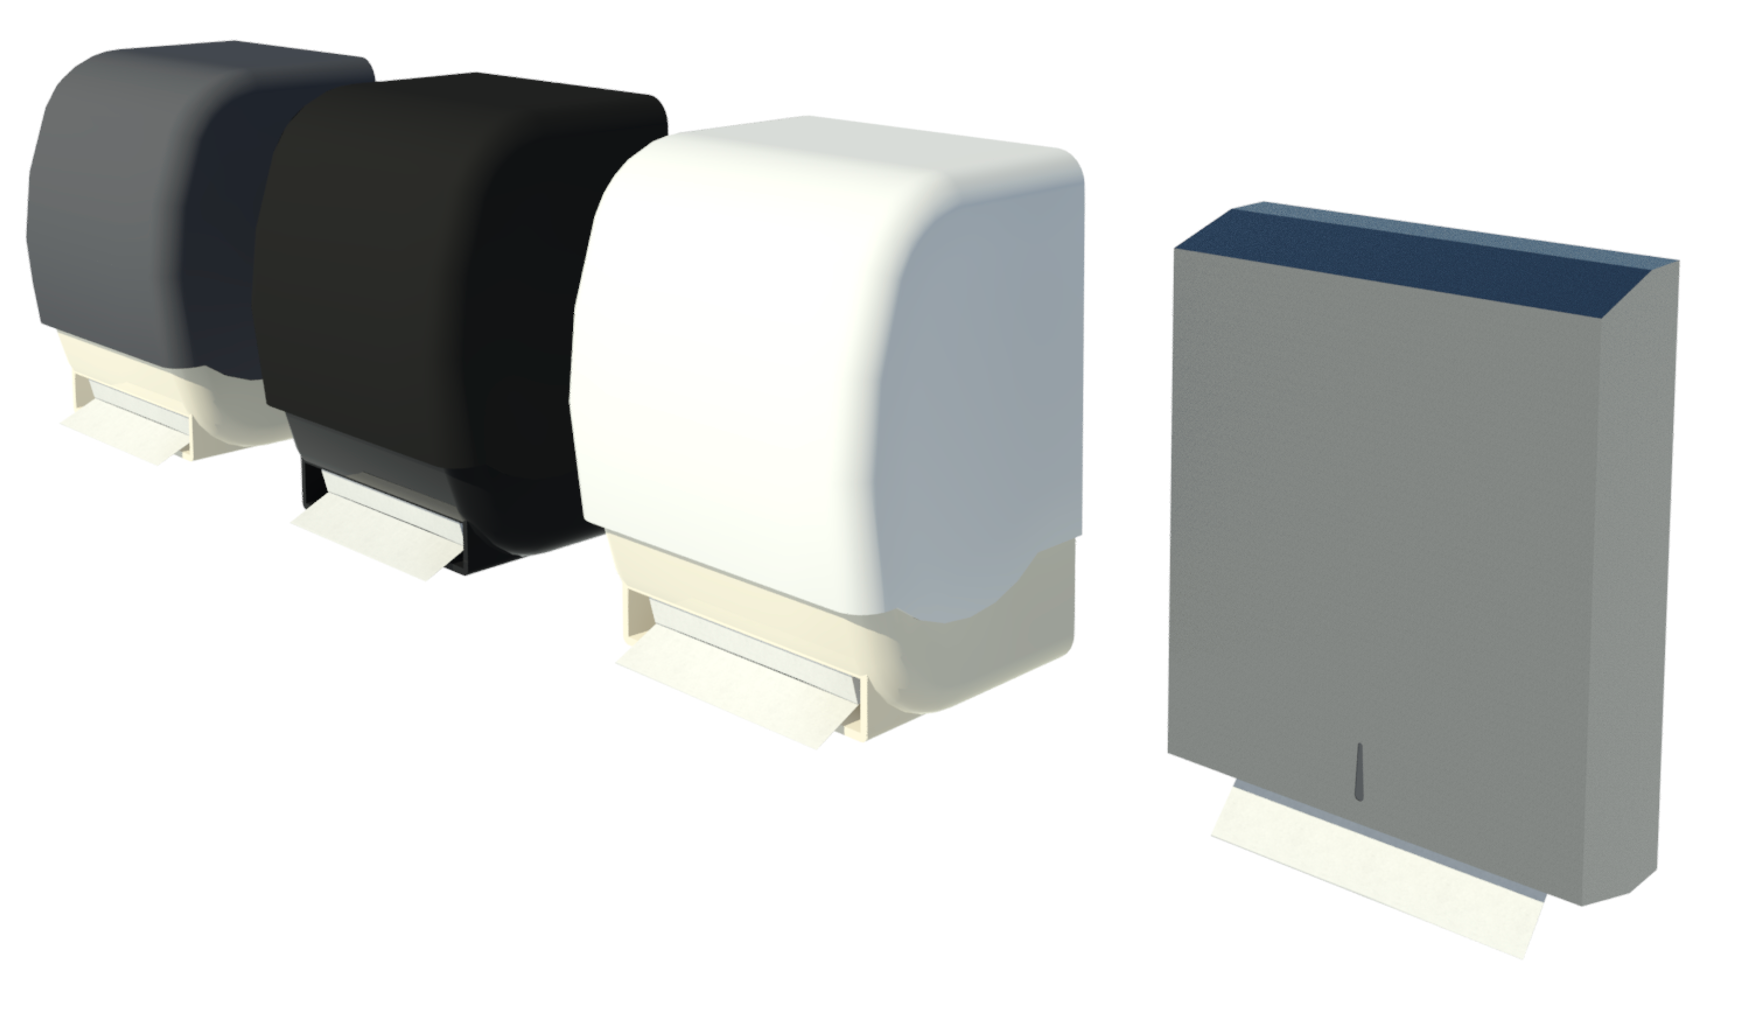 Revit ray trace showing wall-mounted paper towel dispensers.